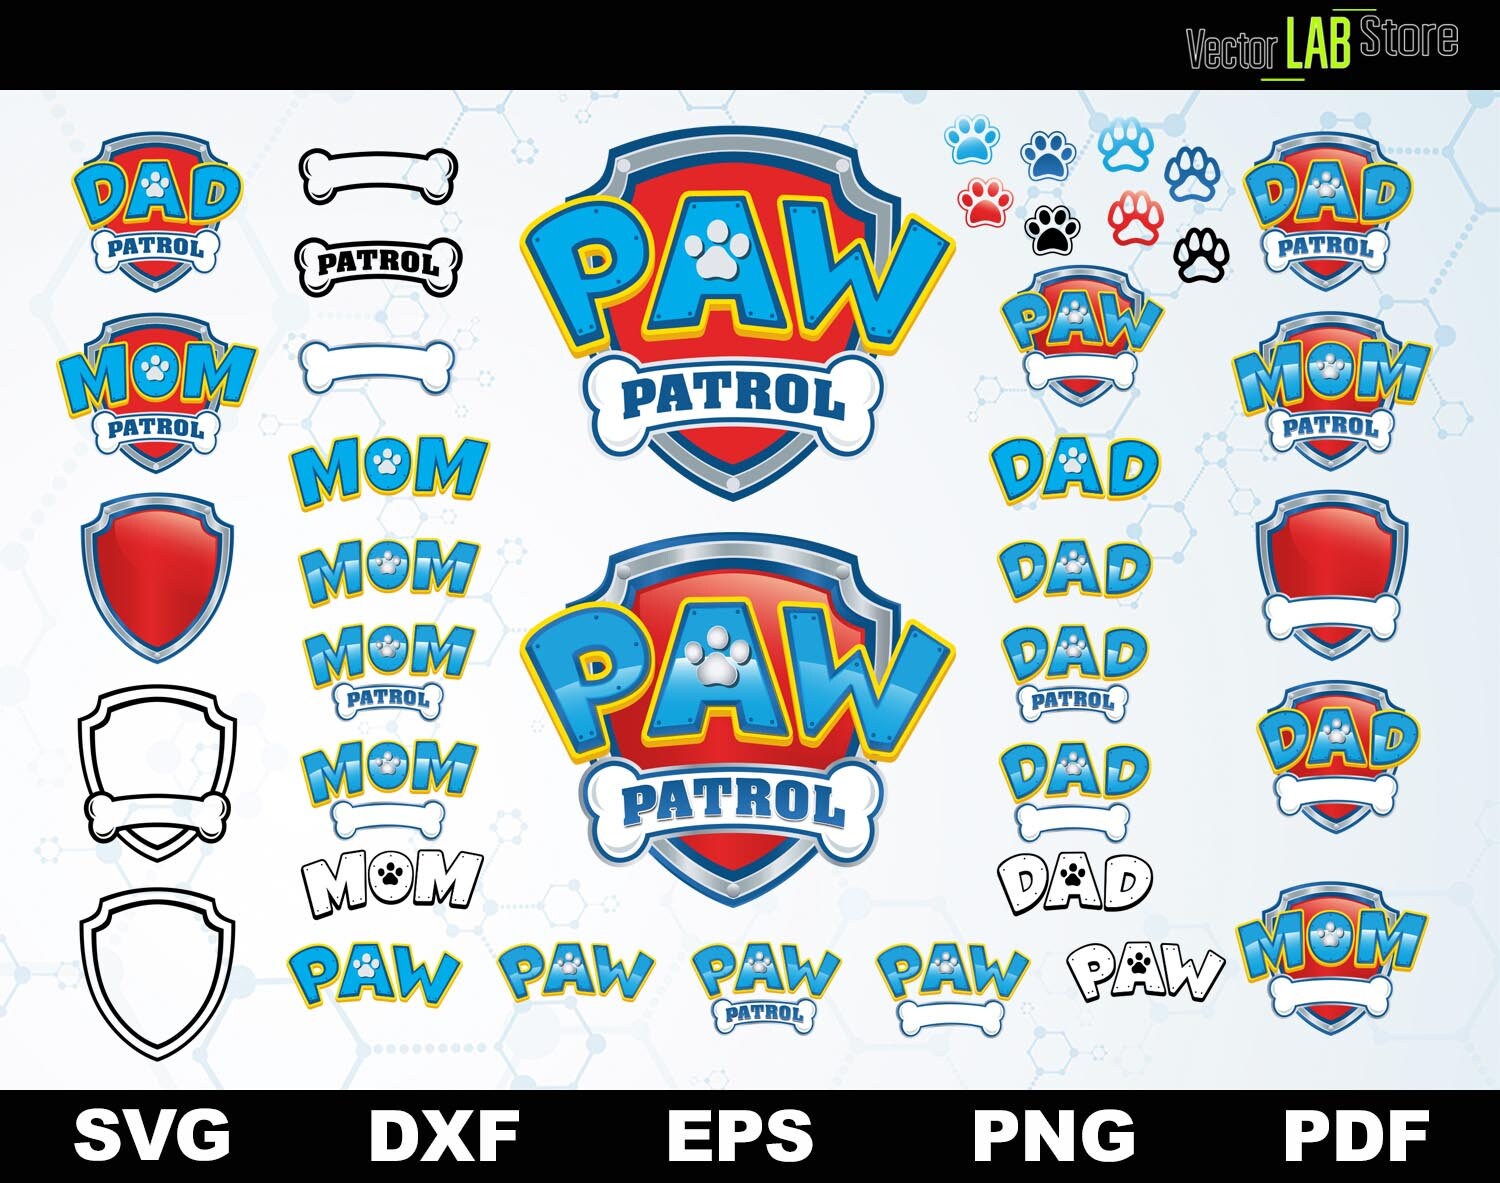 Download Paw Patrol Vector Cutting Files and Clipart Svg Dxf Eps Png | Etsy